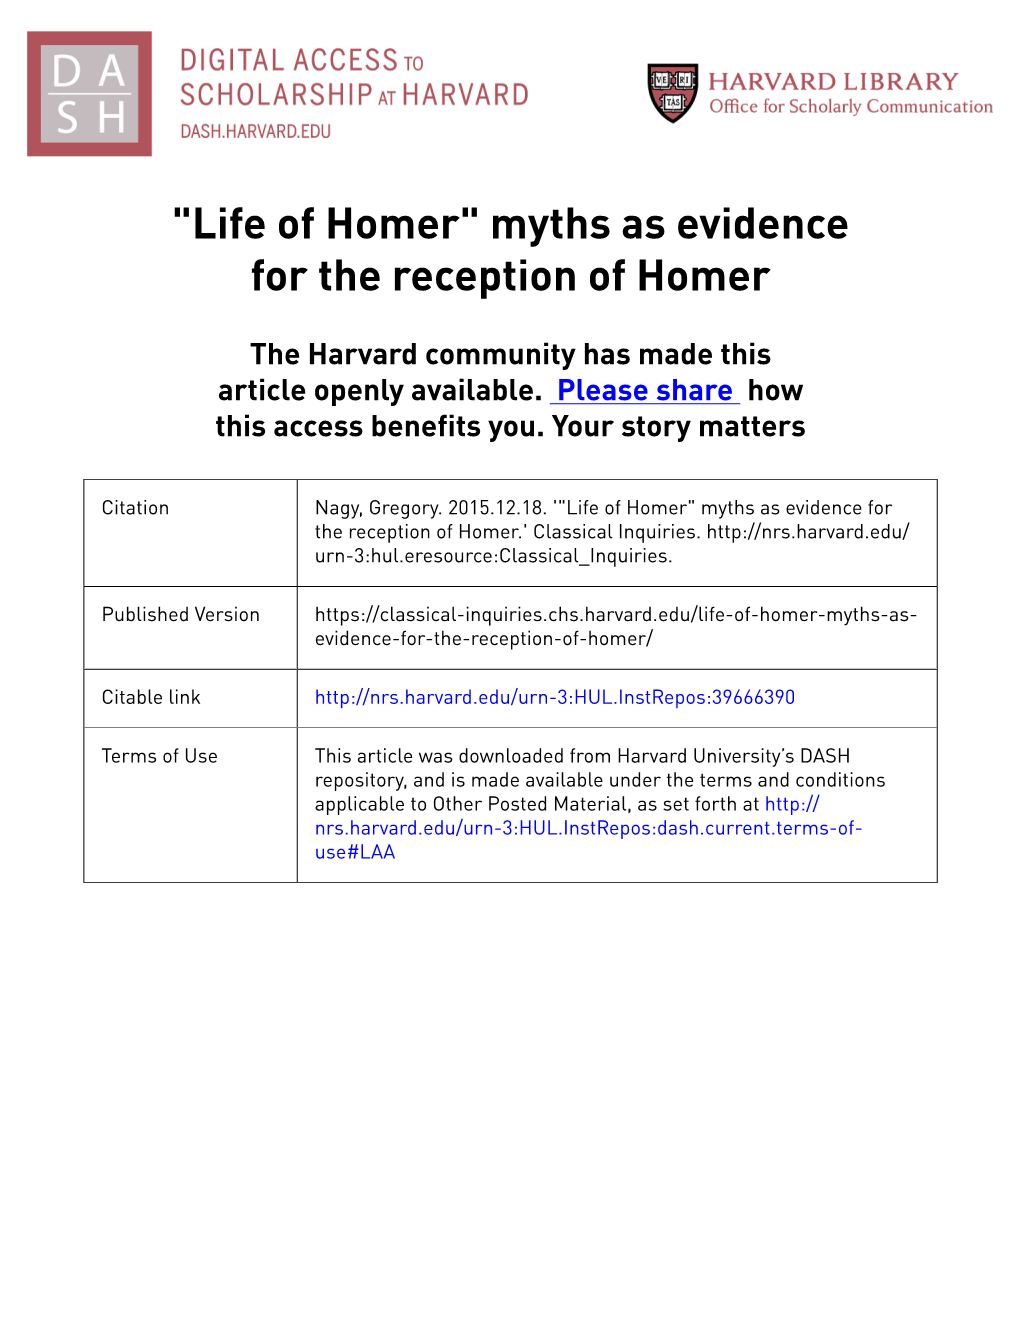 Life of Homer" Myths As Evidence for the Reception of Homer